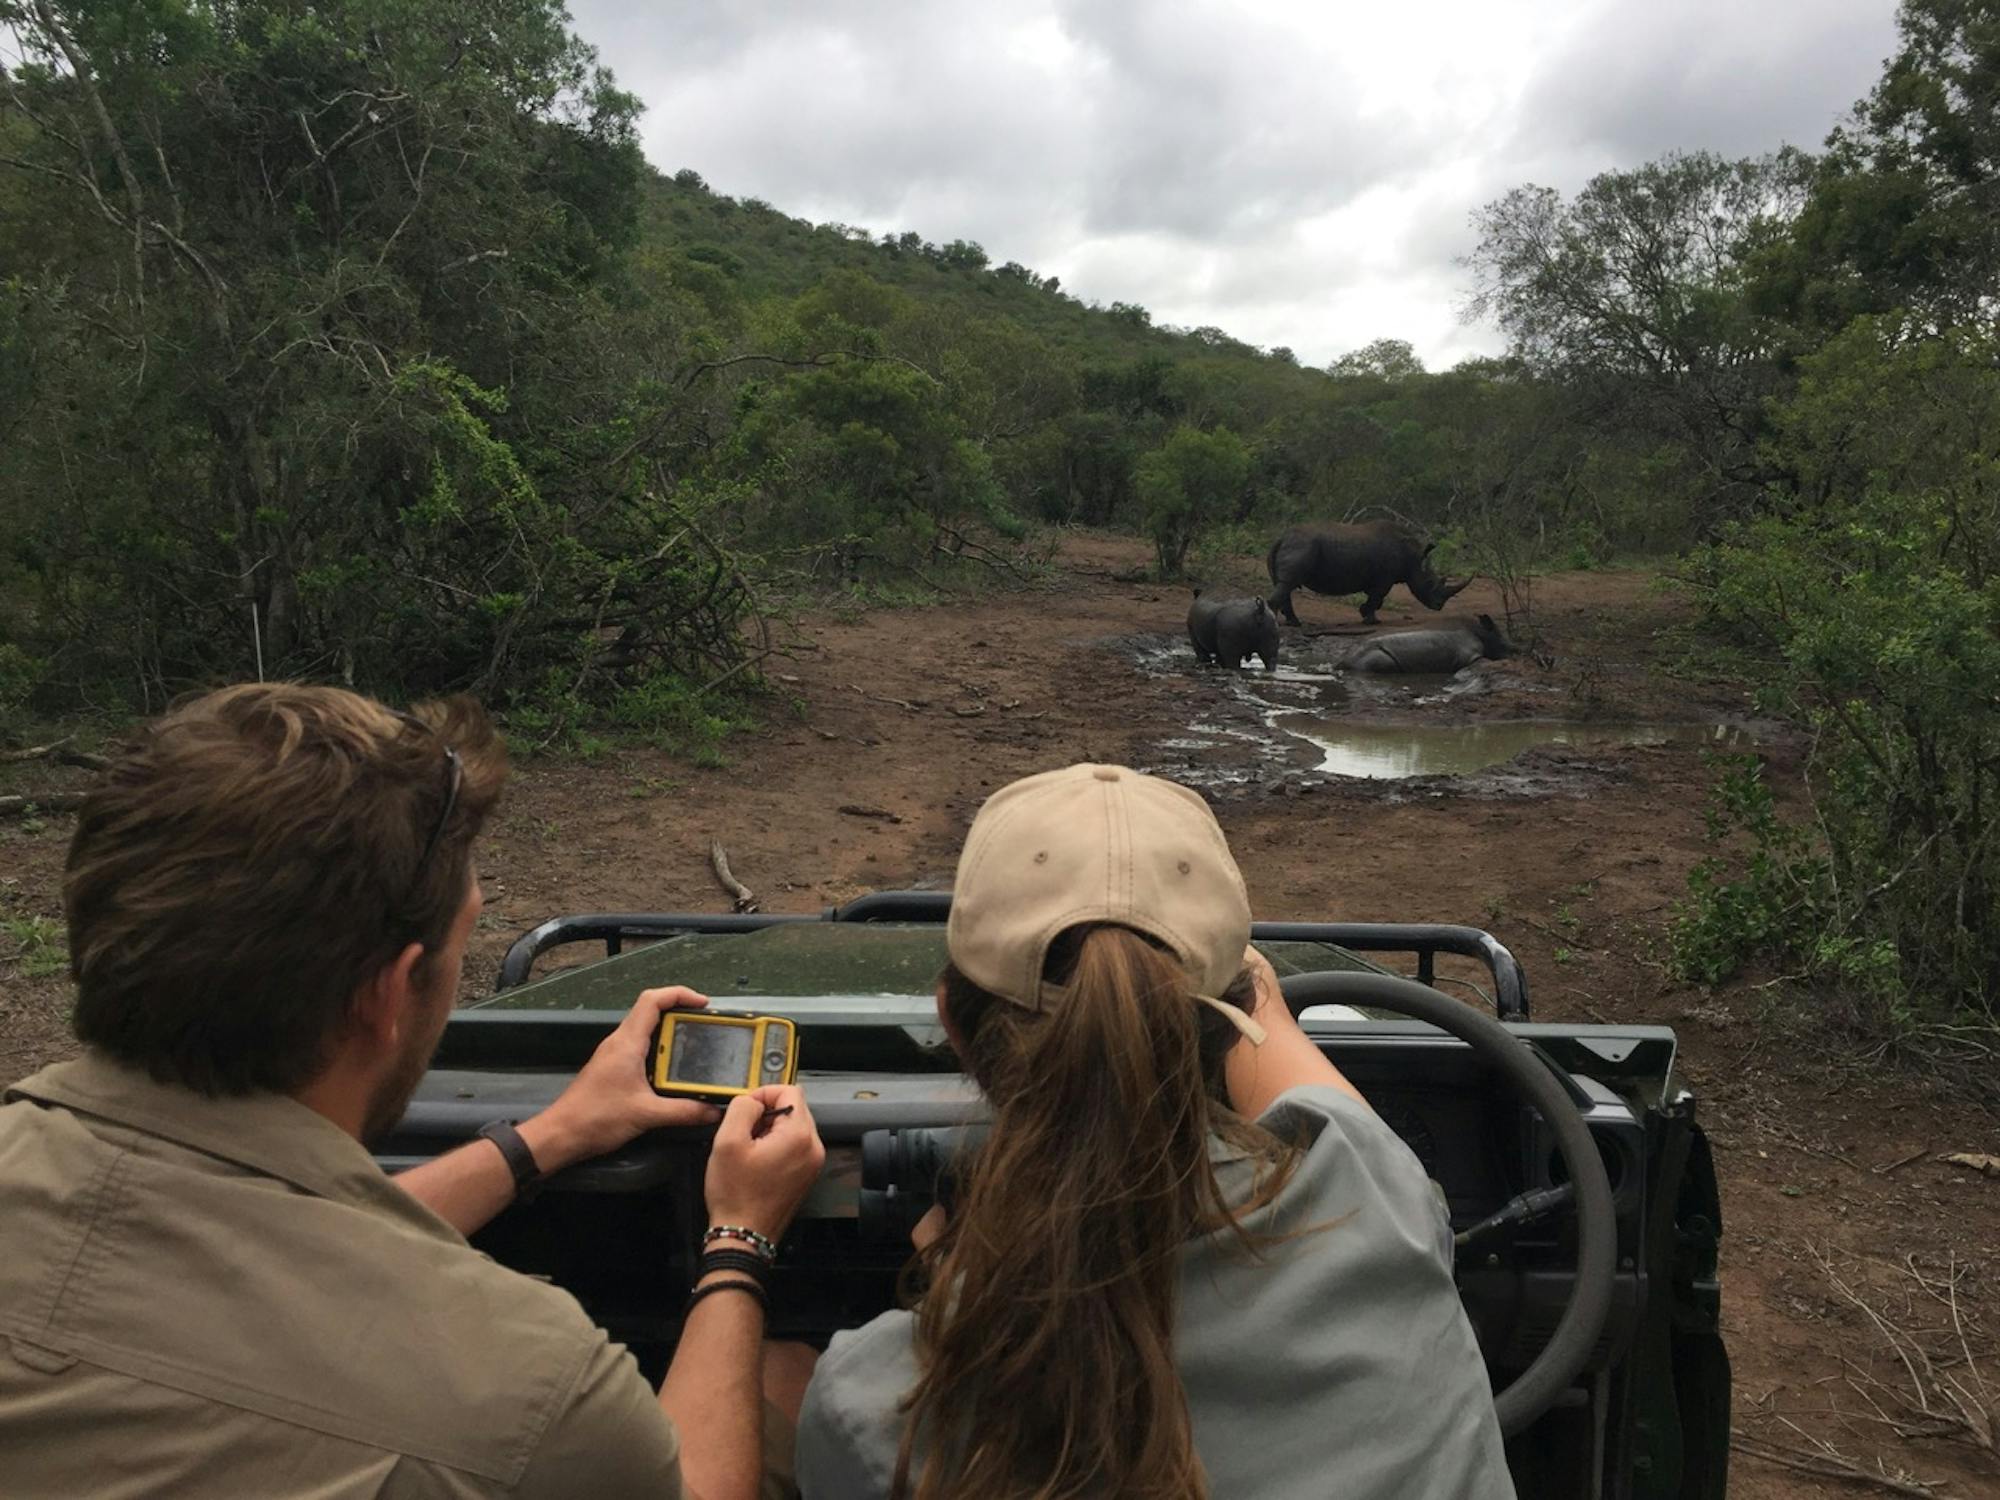 ACE volunteers monitoring rhinos from their vehicle at a safe distance, using equipment